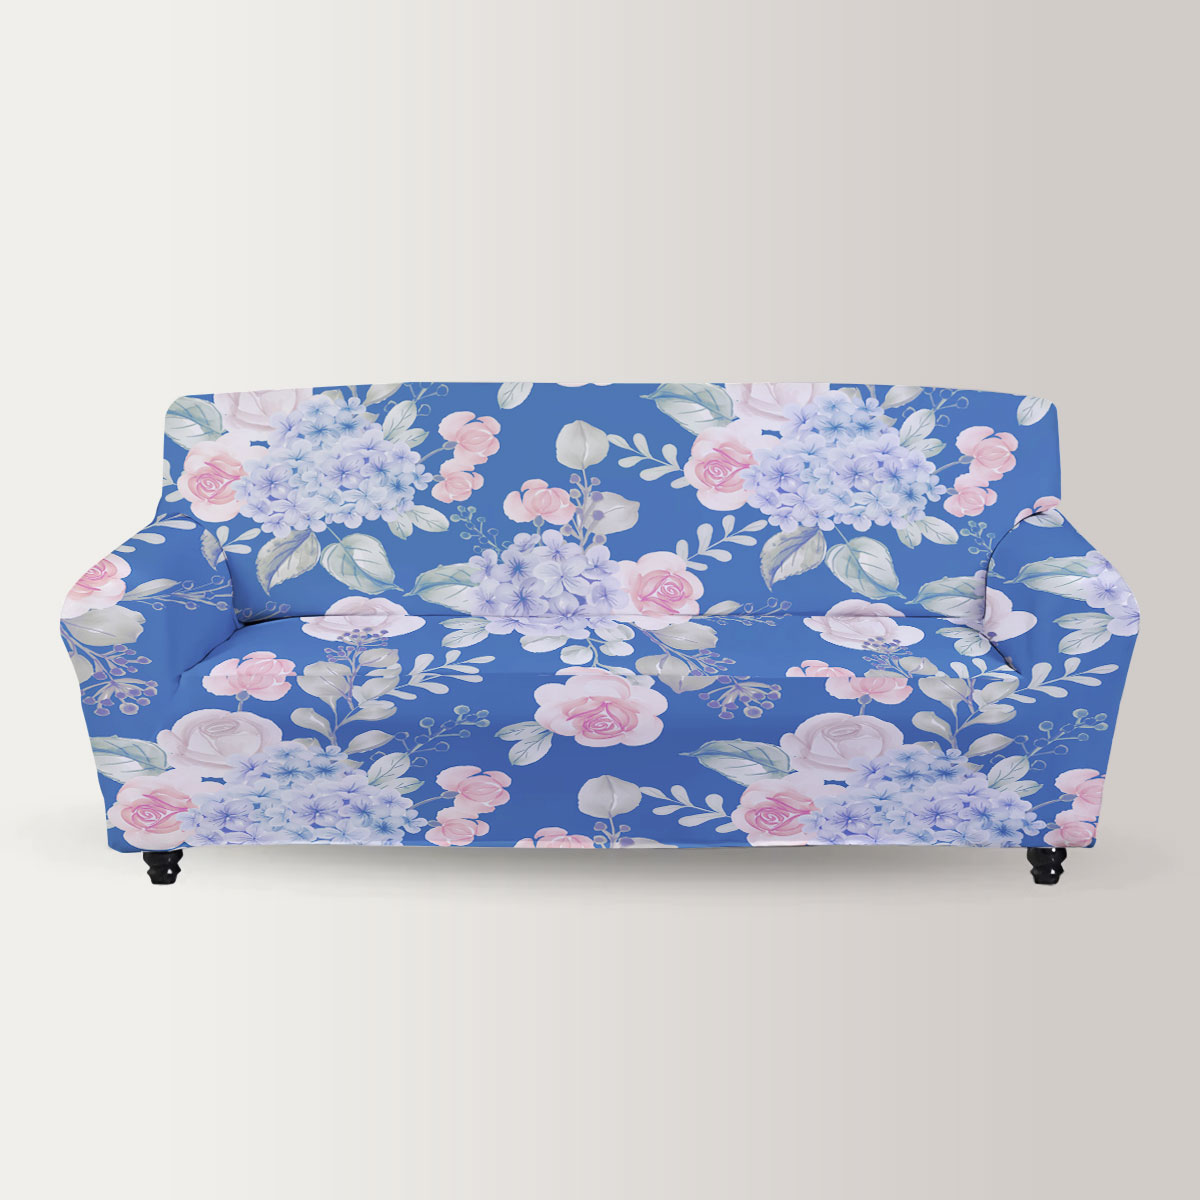 Watercolor Flower Hydrangea And Leaves Blue Sofa Cover